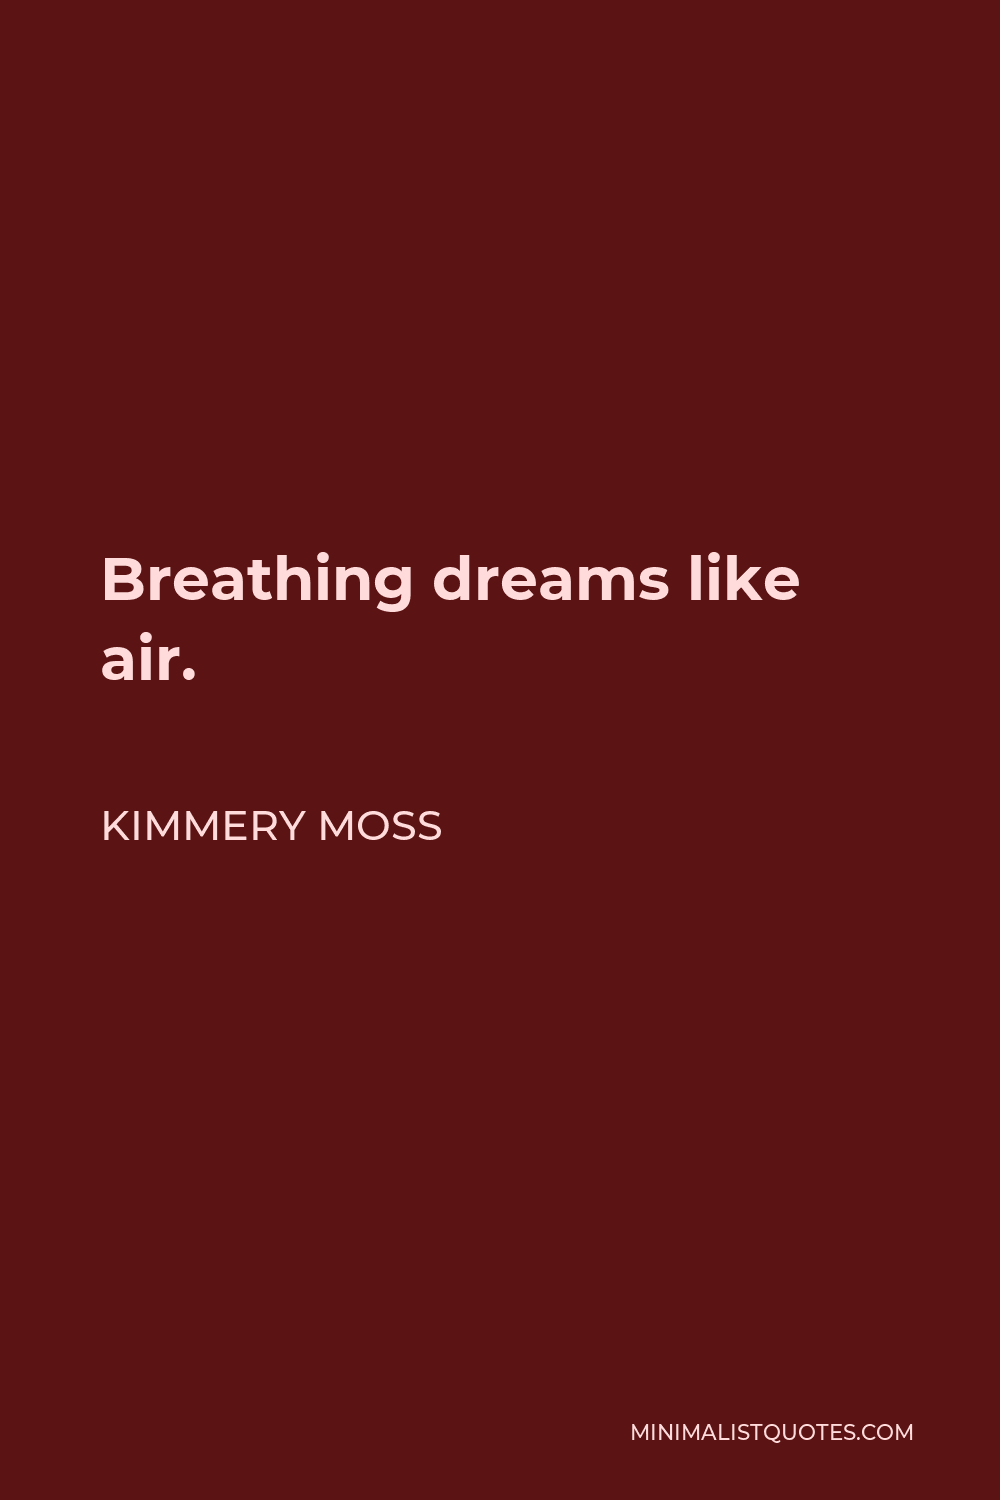 Kimmery Moss Quote - Breathing dreams like air.